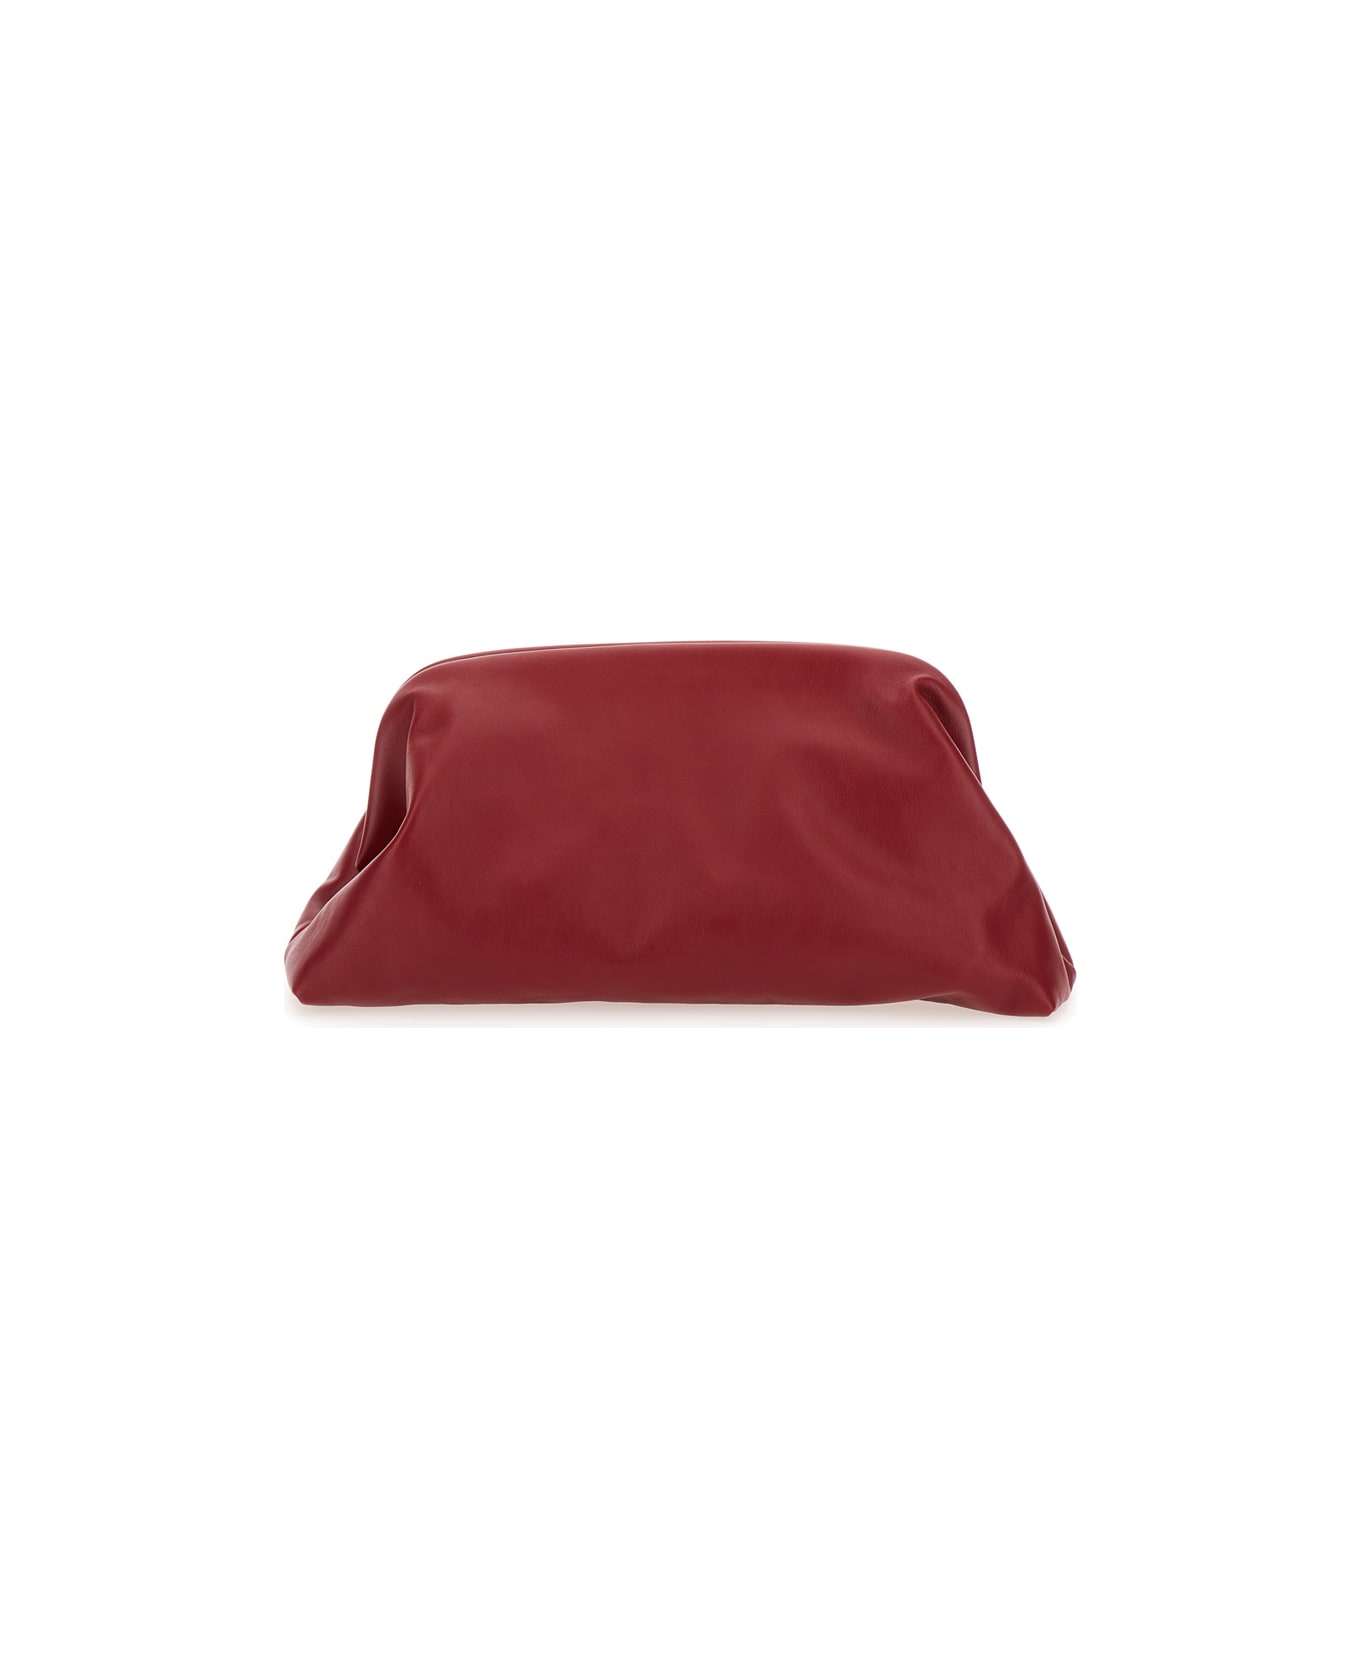 Philosophy di Lorenzo Serafini 'lauren' Bordeaux Maxi Clutch With Magnetic Closure In Leather Woman - Red